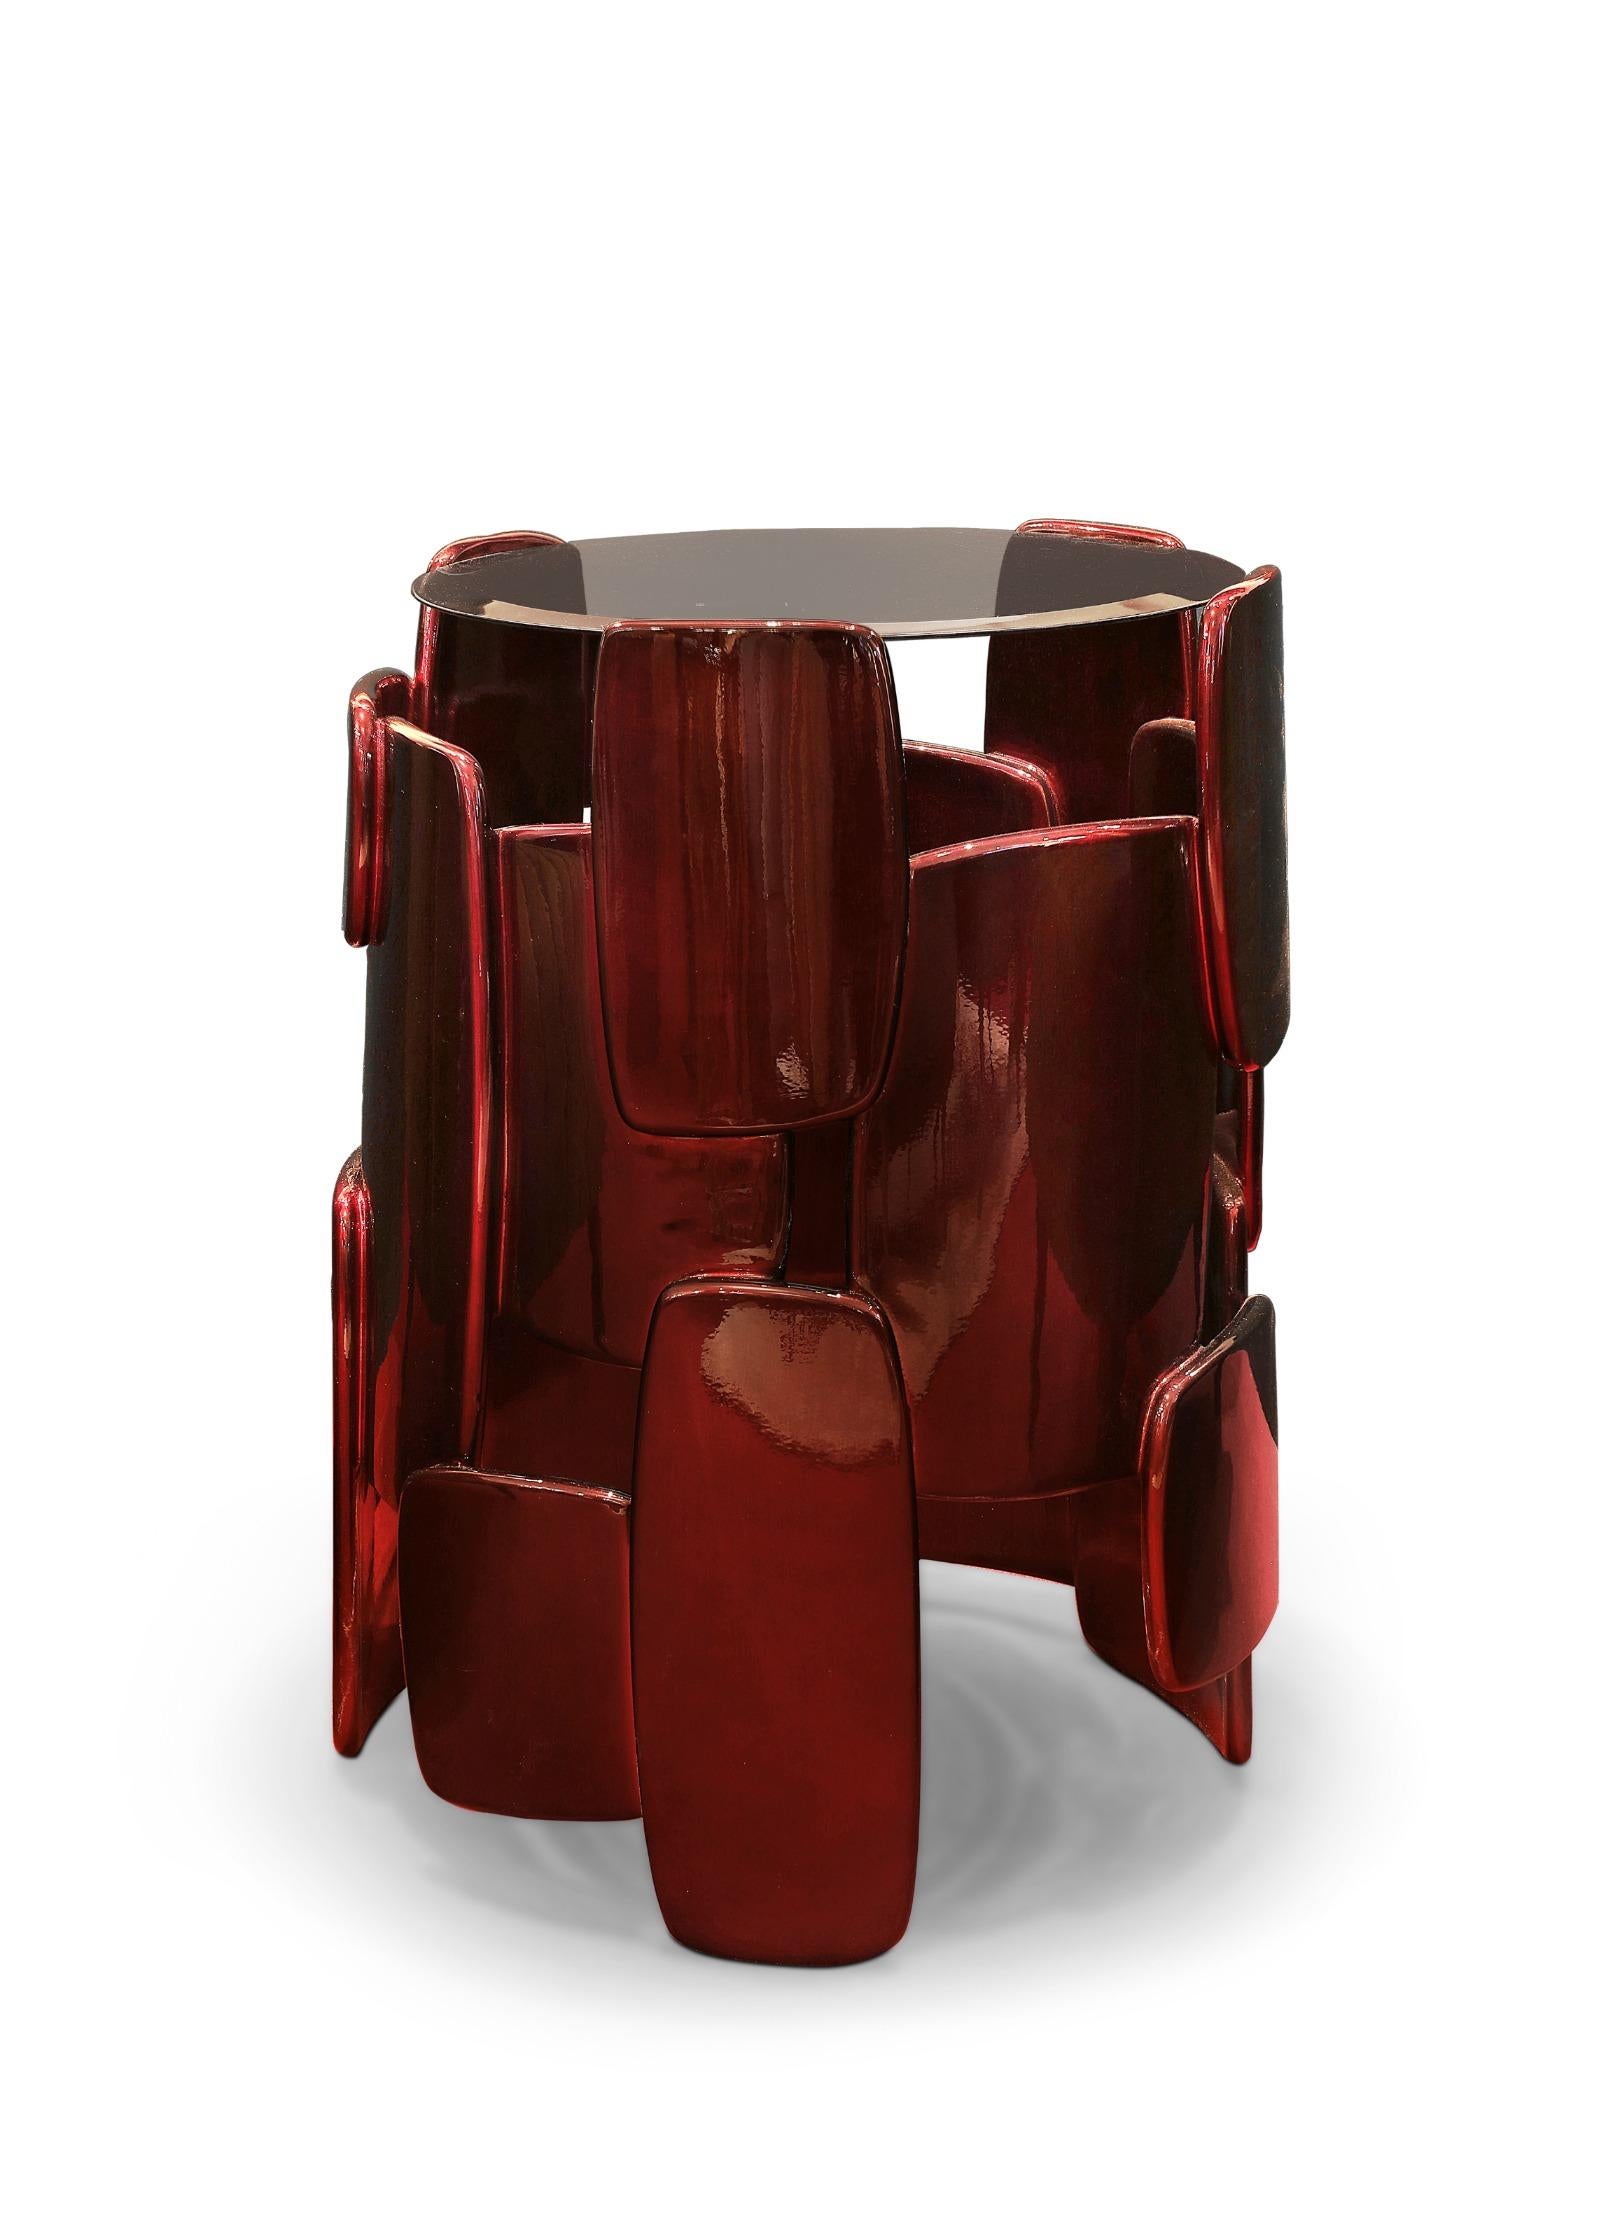 Goroka is known for their dazzling explosion of color and feathers as a way to impress the enemy. GOROKA side table takes inspiration from this tribe located in Papua New Guinea. It is coated with silver leaf with shades of translucent red and a